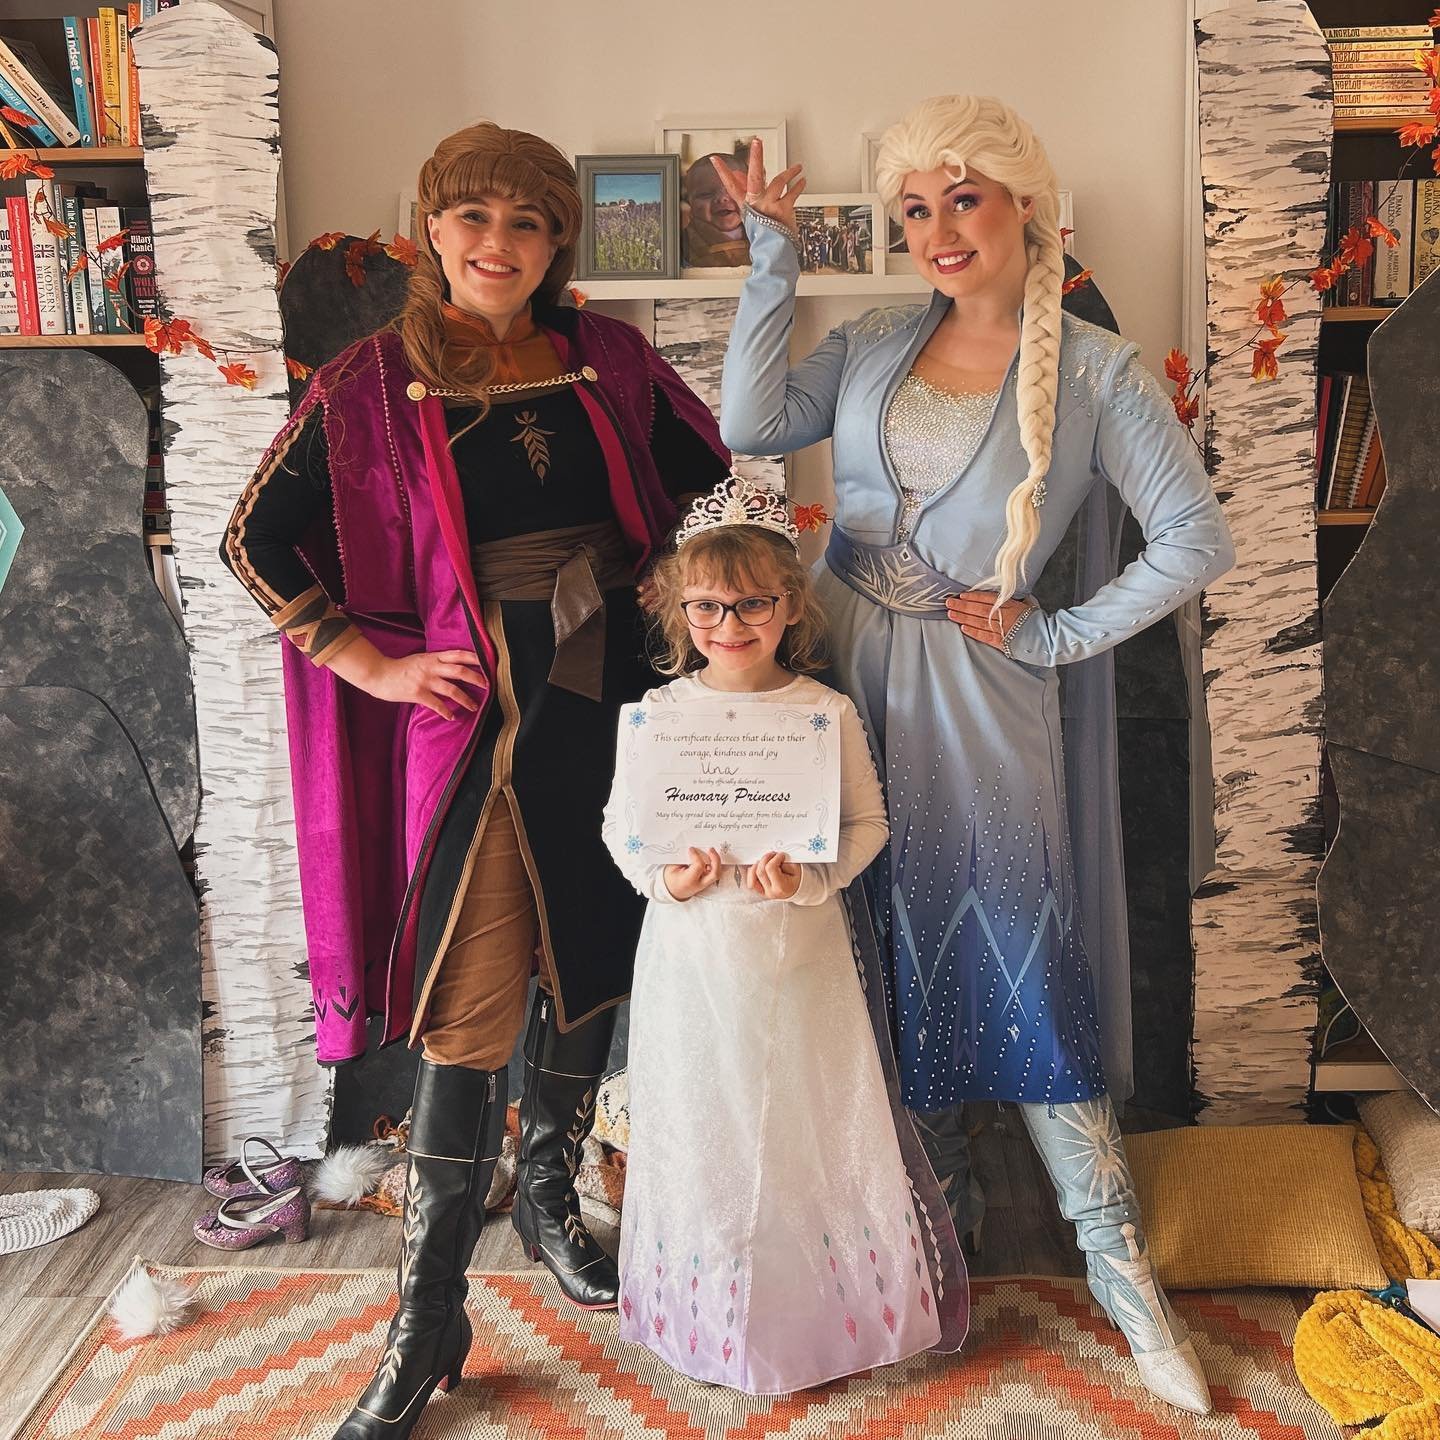 We love when families go all out for parties!❄️🍂 Our ice sisters attended this celebration with lots of homemade decor, including the frozen 2 4 spirit stone pillars, a 3D printed Elsa crown, teepees in the garden and lots of frozen activities! They